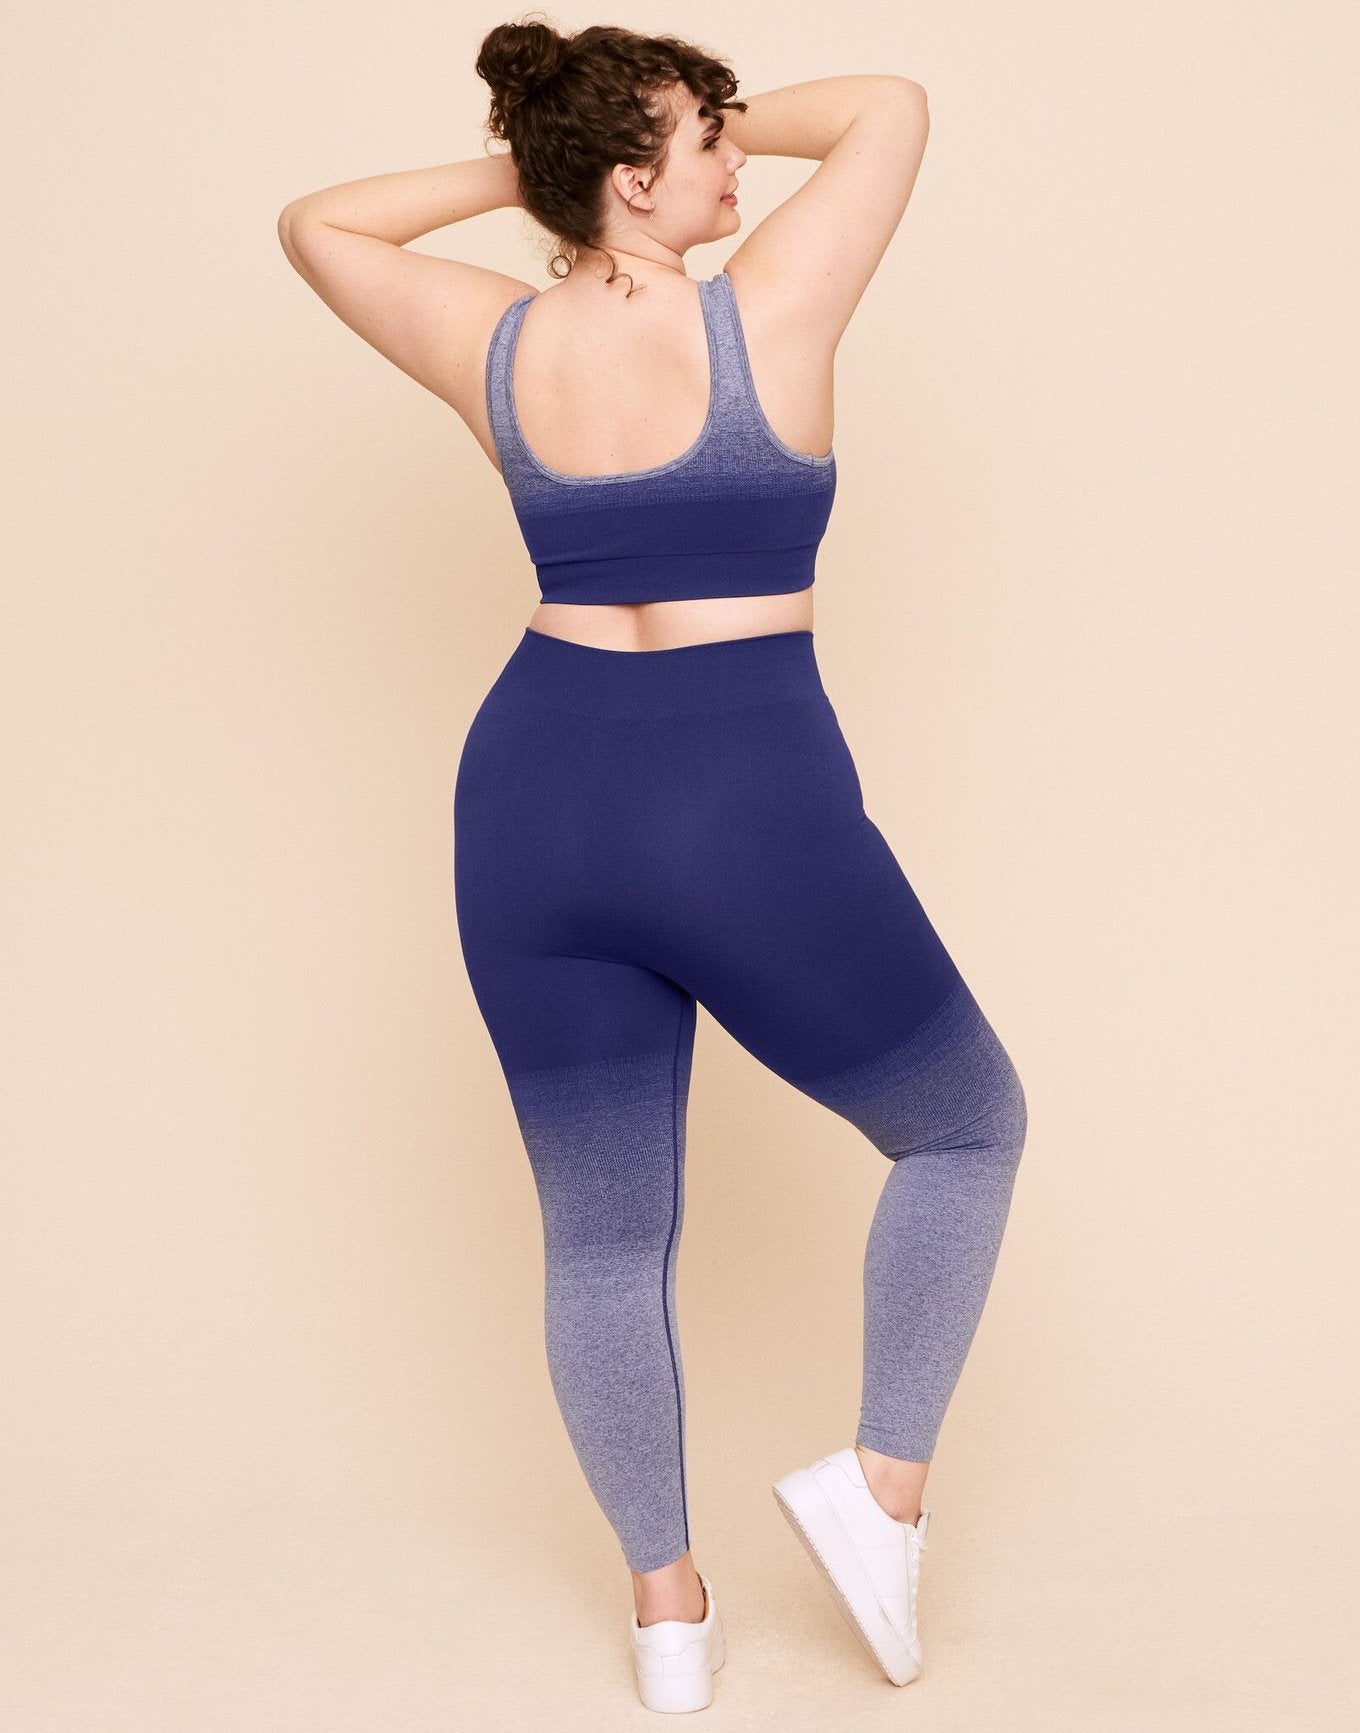 Earth Republic Lilah Ombre Full Legging Leggings in color Solid 02 - Ombre Navy and shape legging